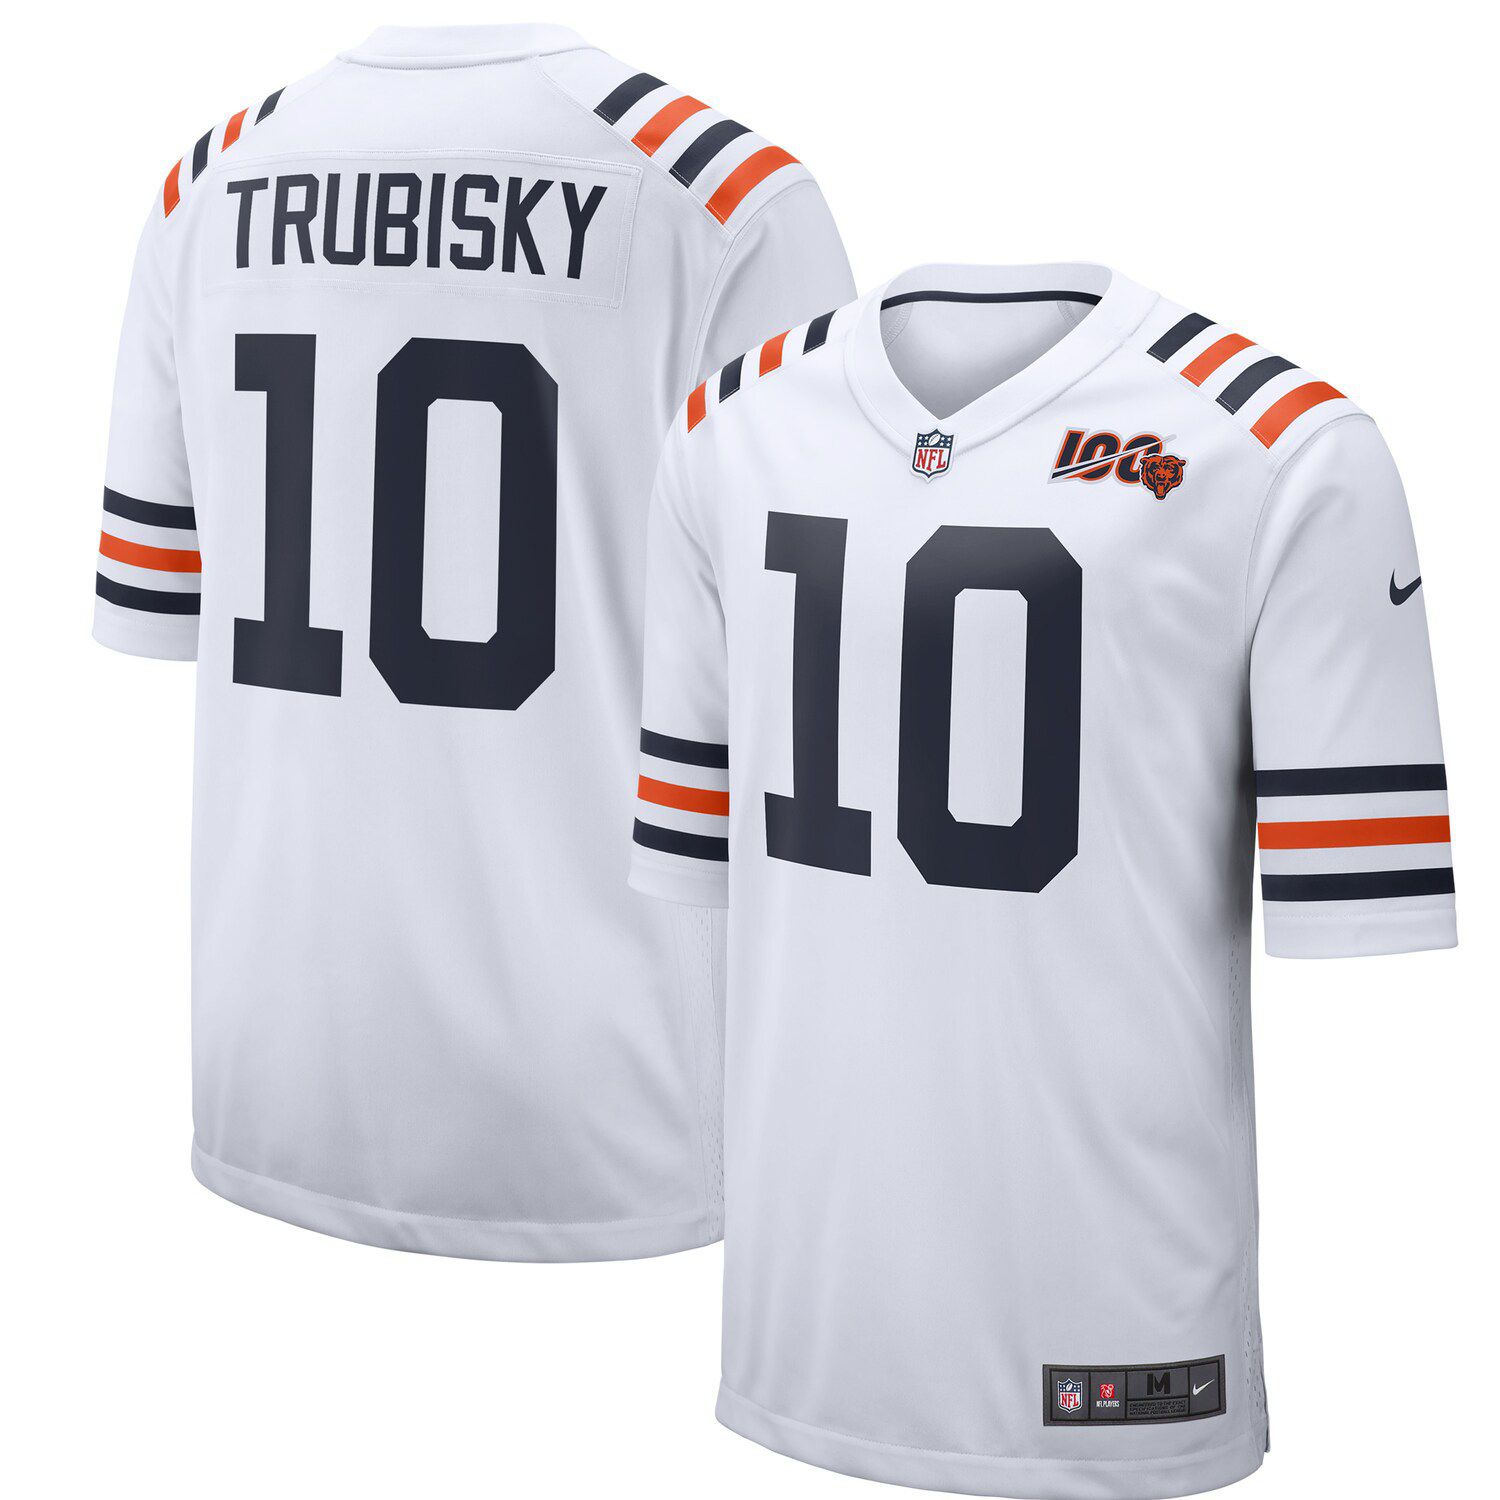 mitchell trubisky authentic jersey